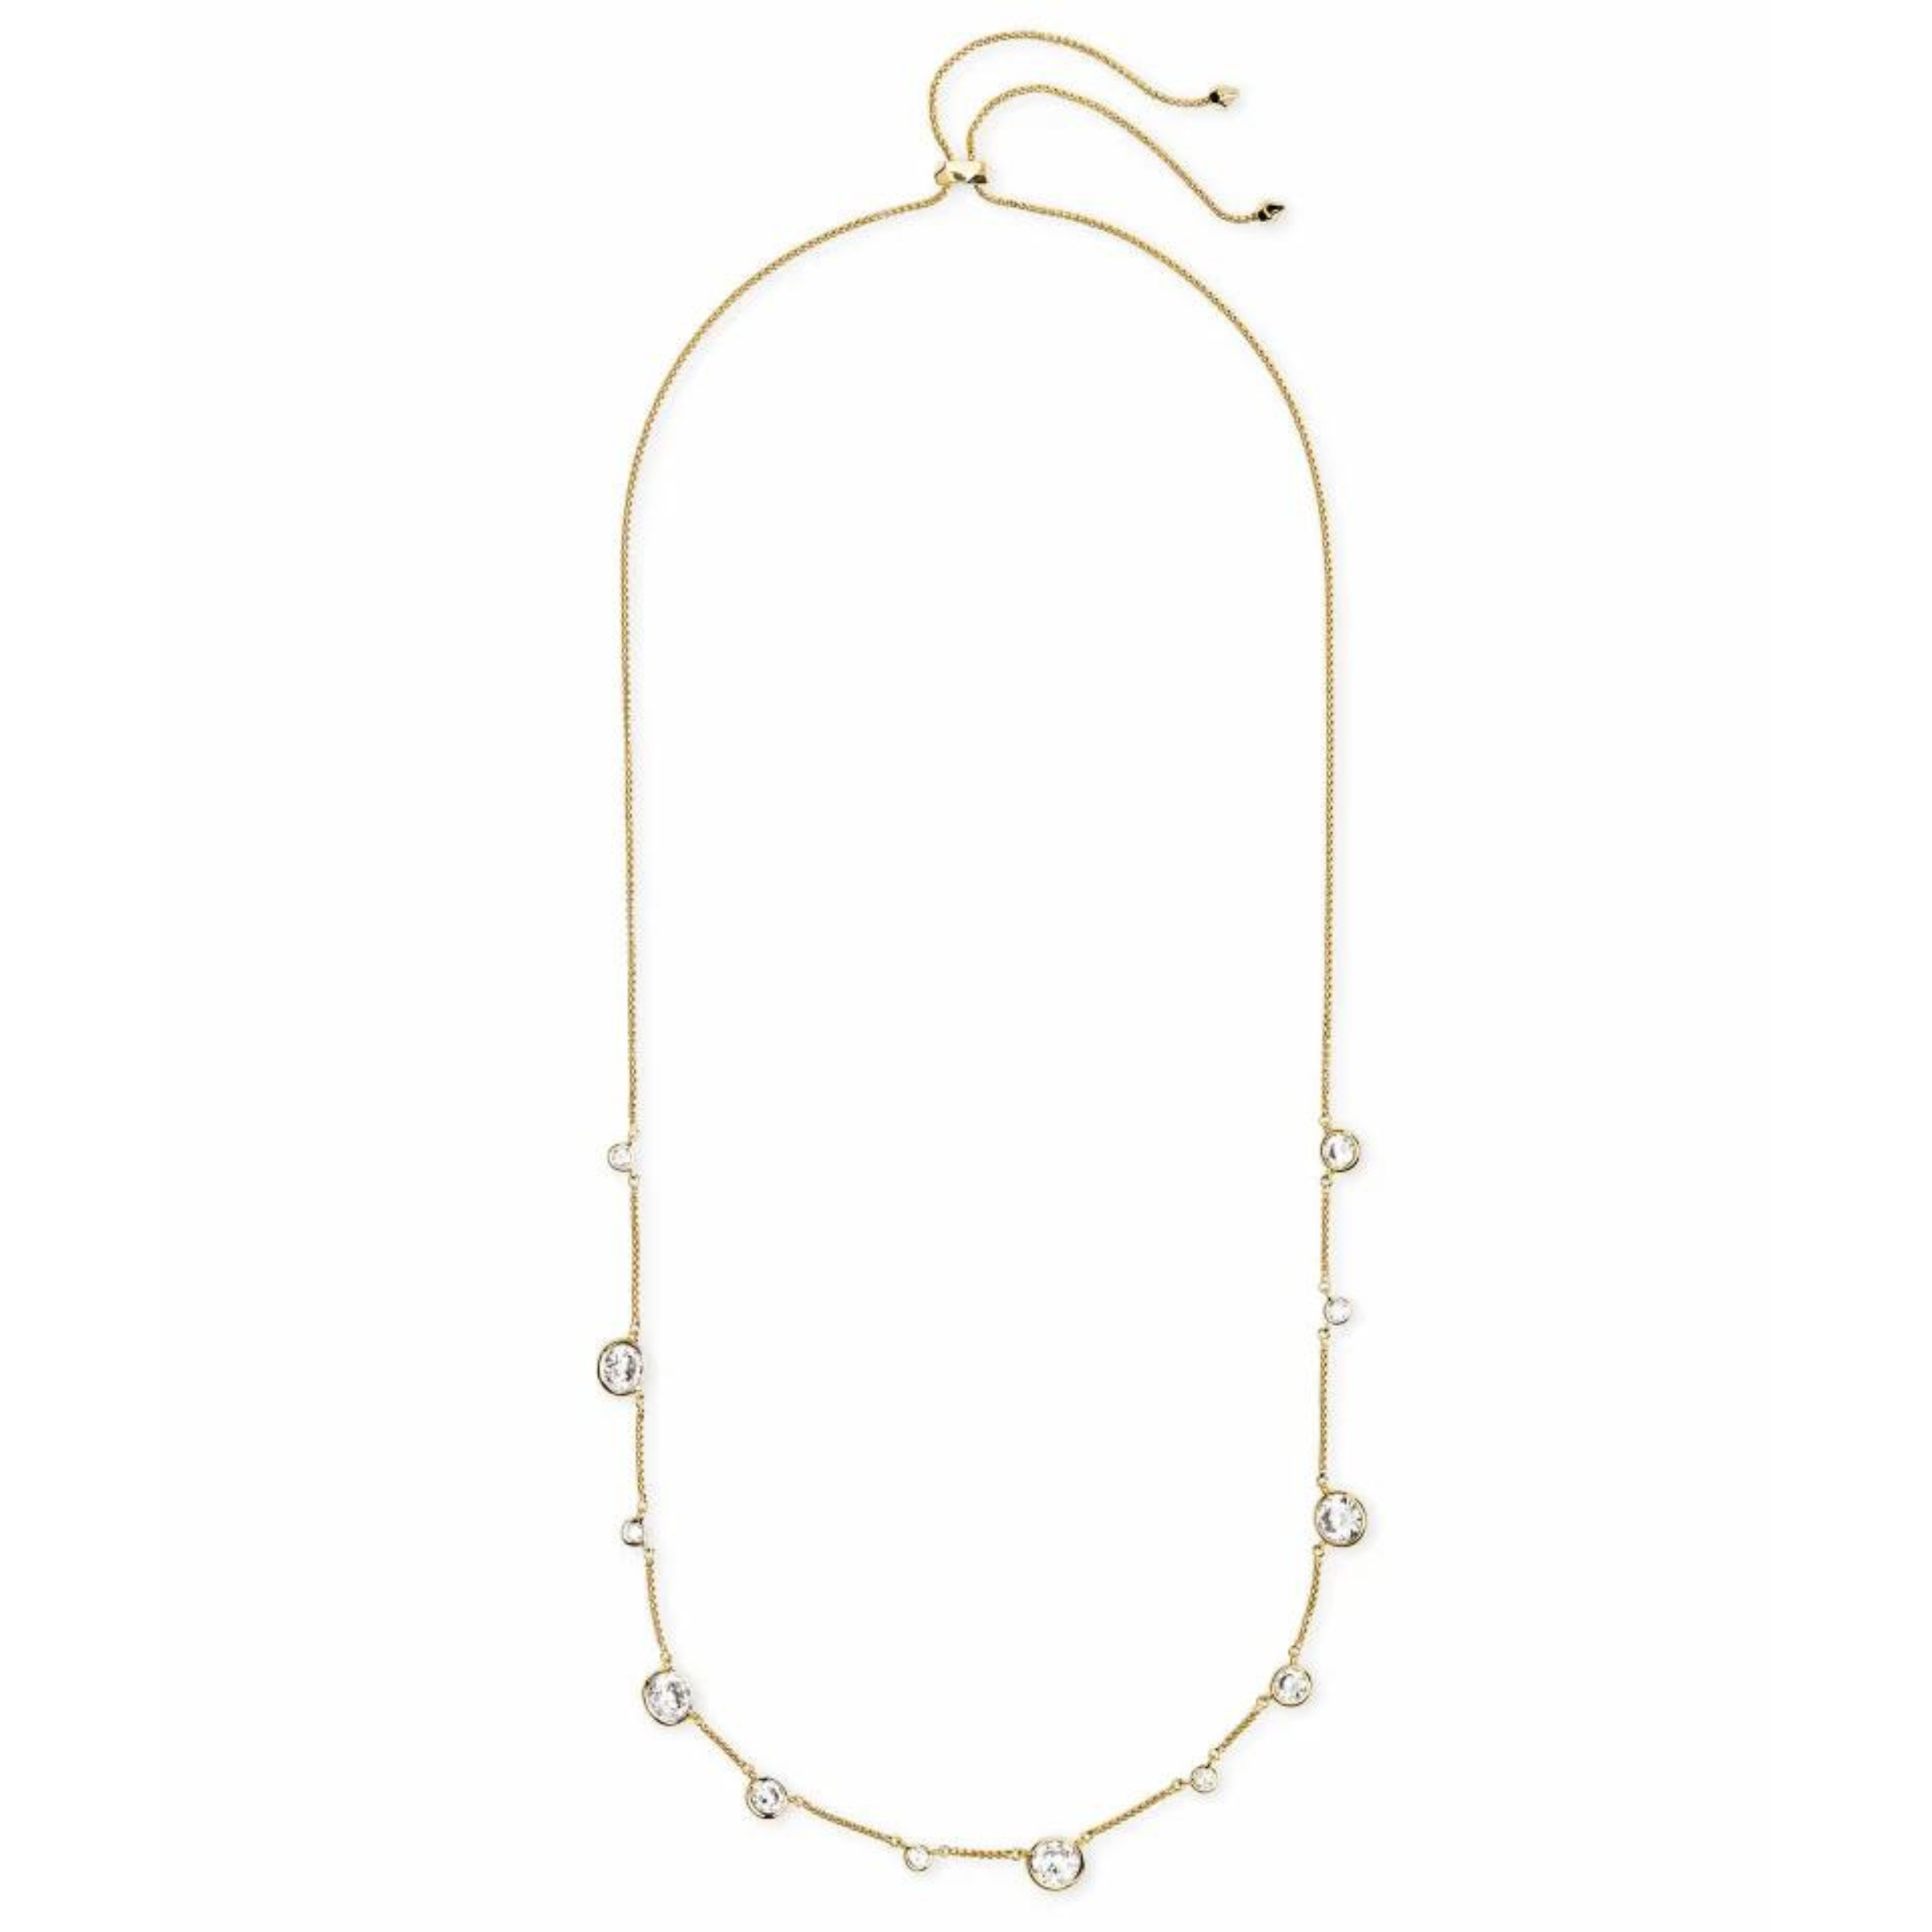 Kendra Scott | Clementine Choker Necklace in Gold